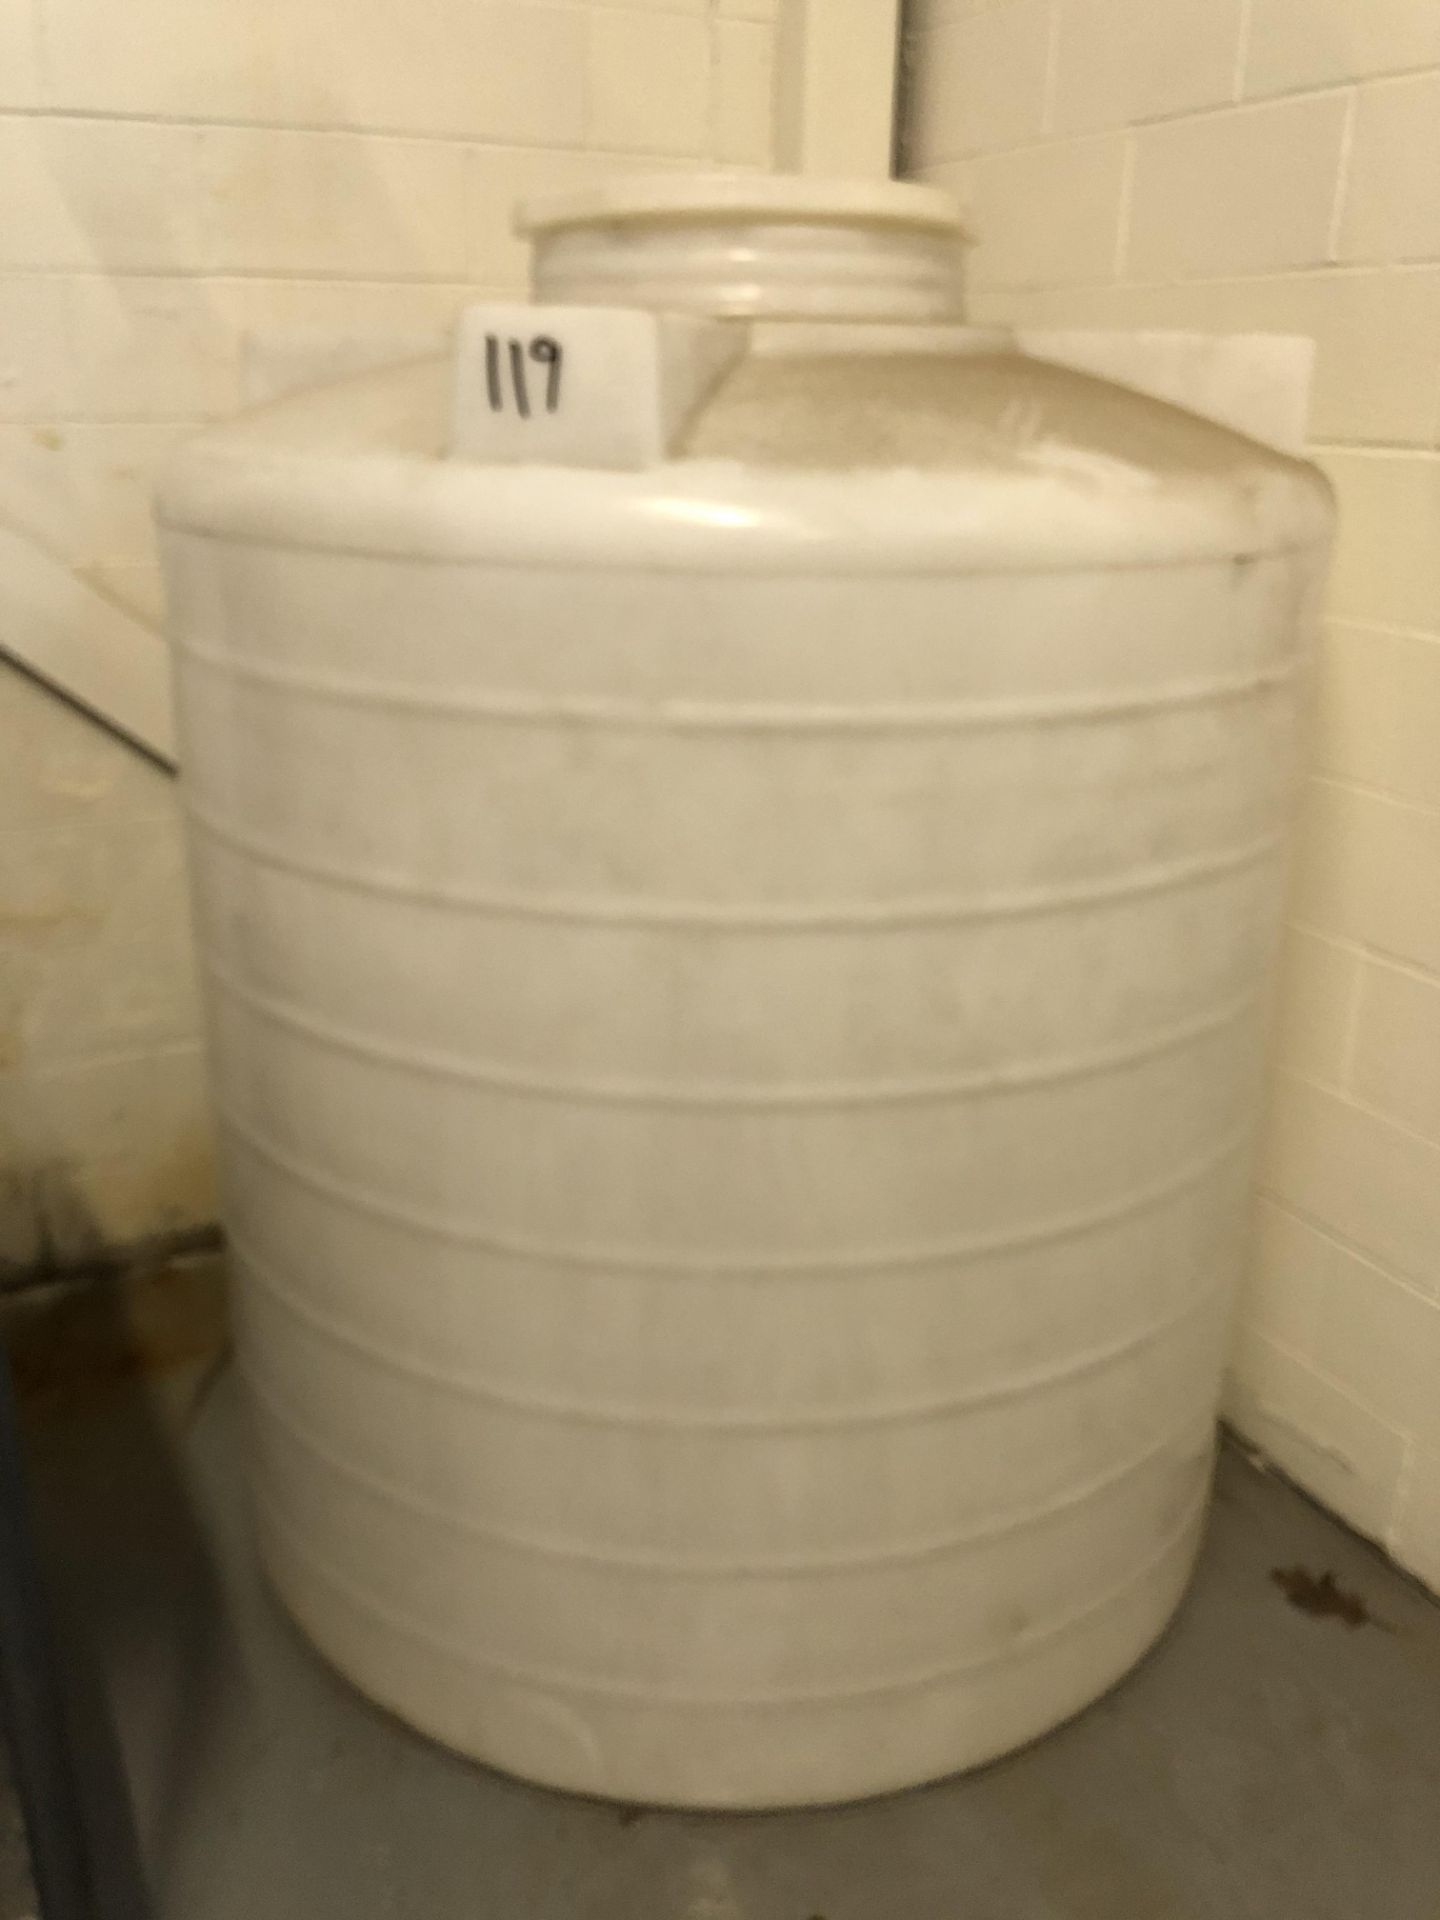 Approx. 500 Gal. Poly Tank